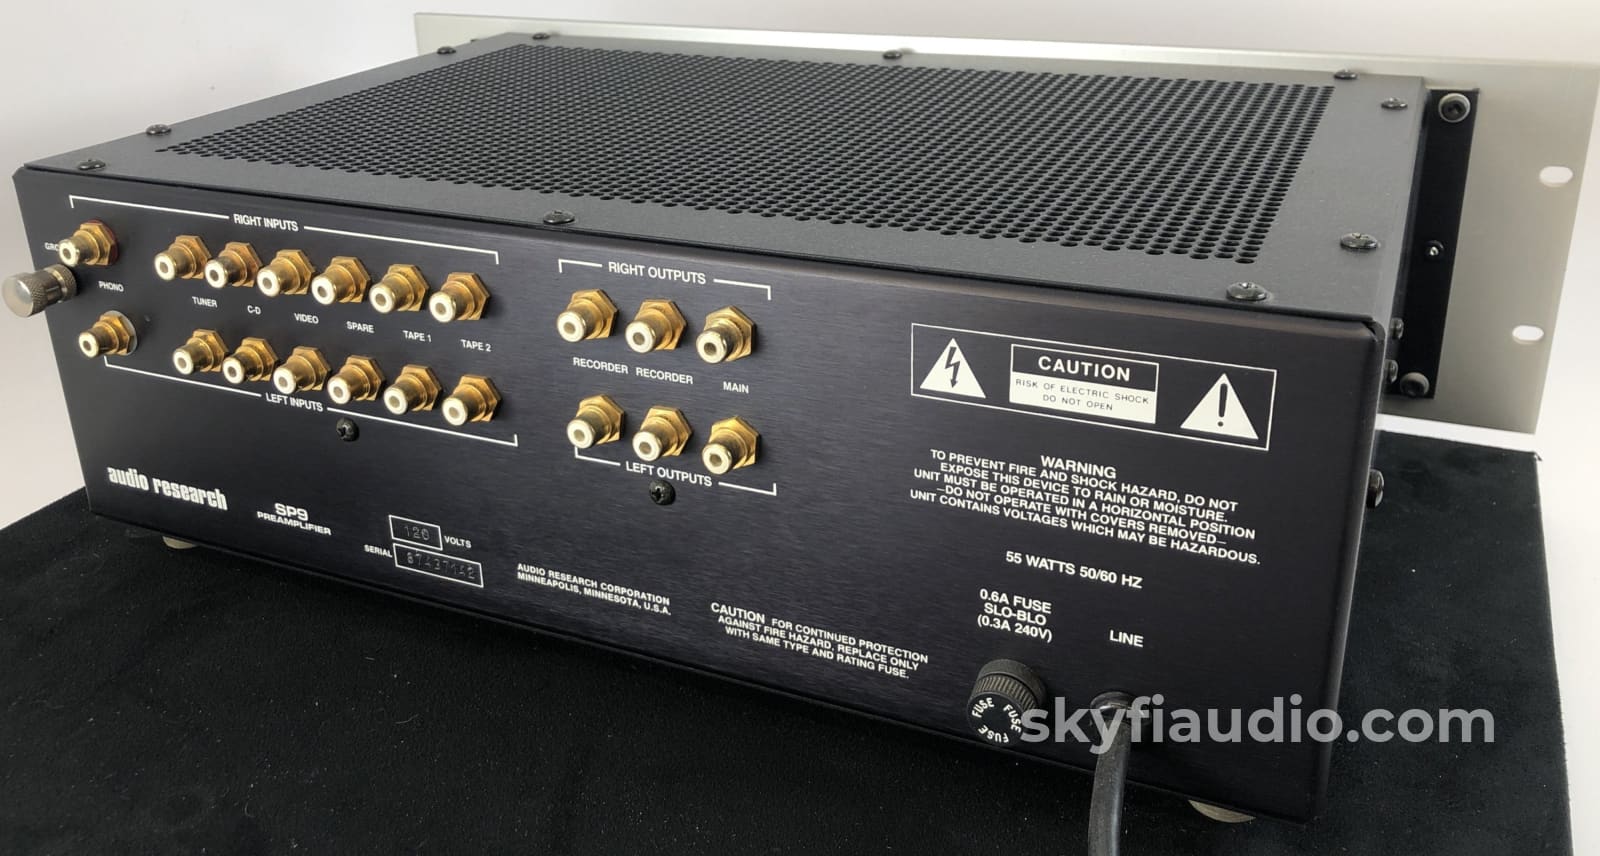 Audio Research Sp9 Tube / Solid State Hybrid Preamp With Phono Input Preamplifier